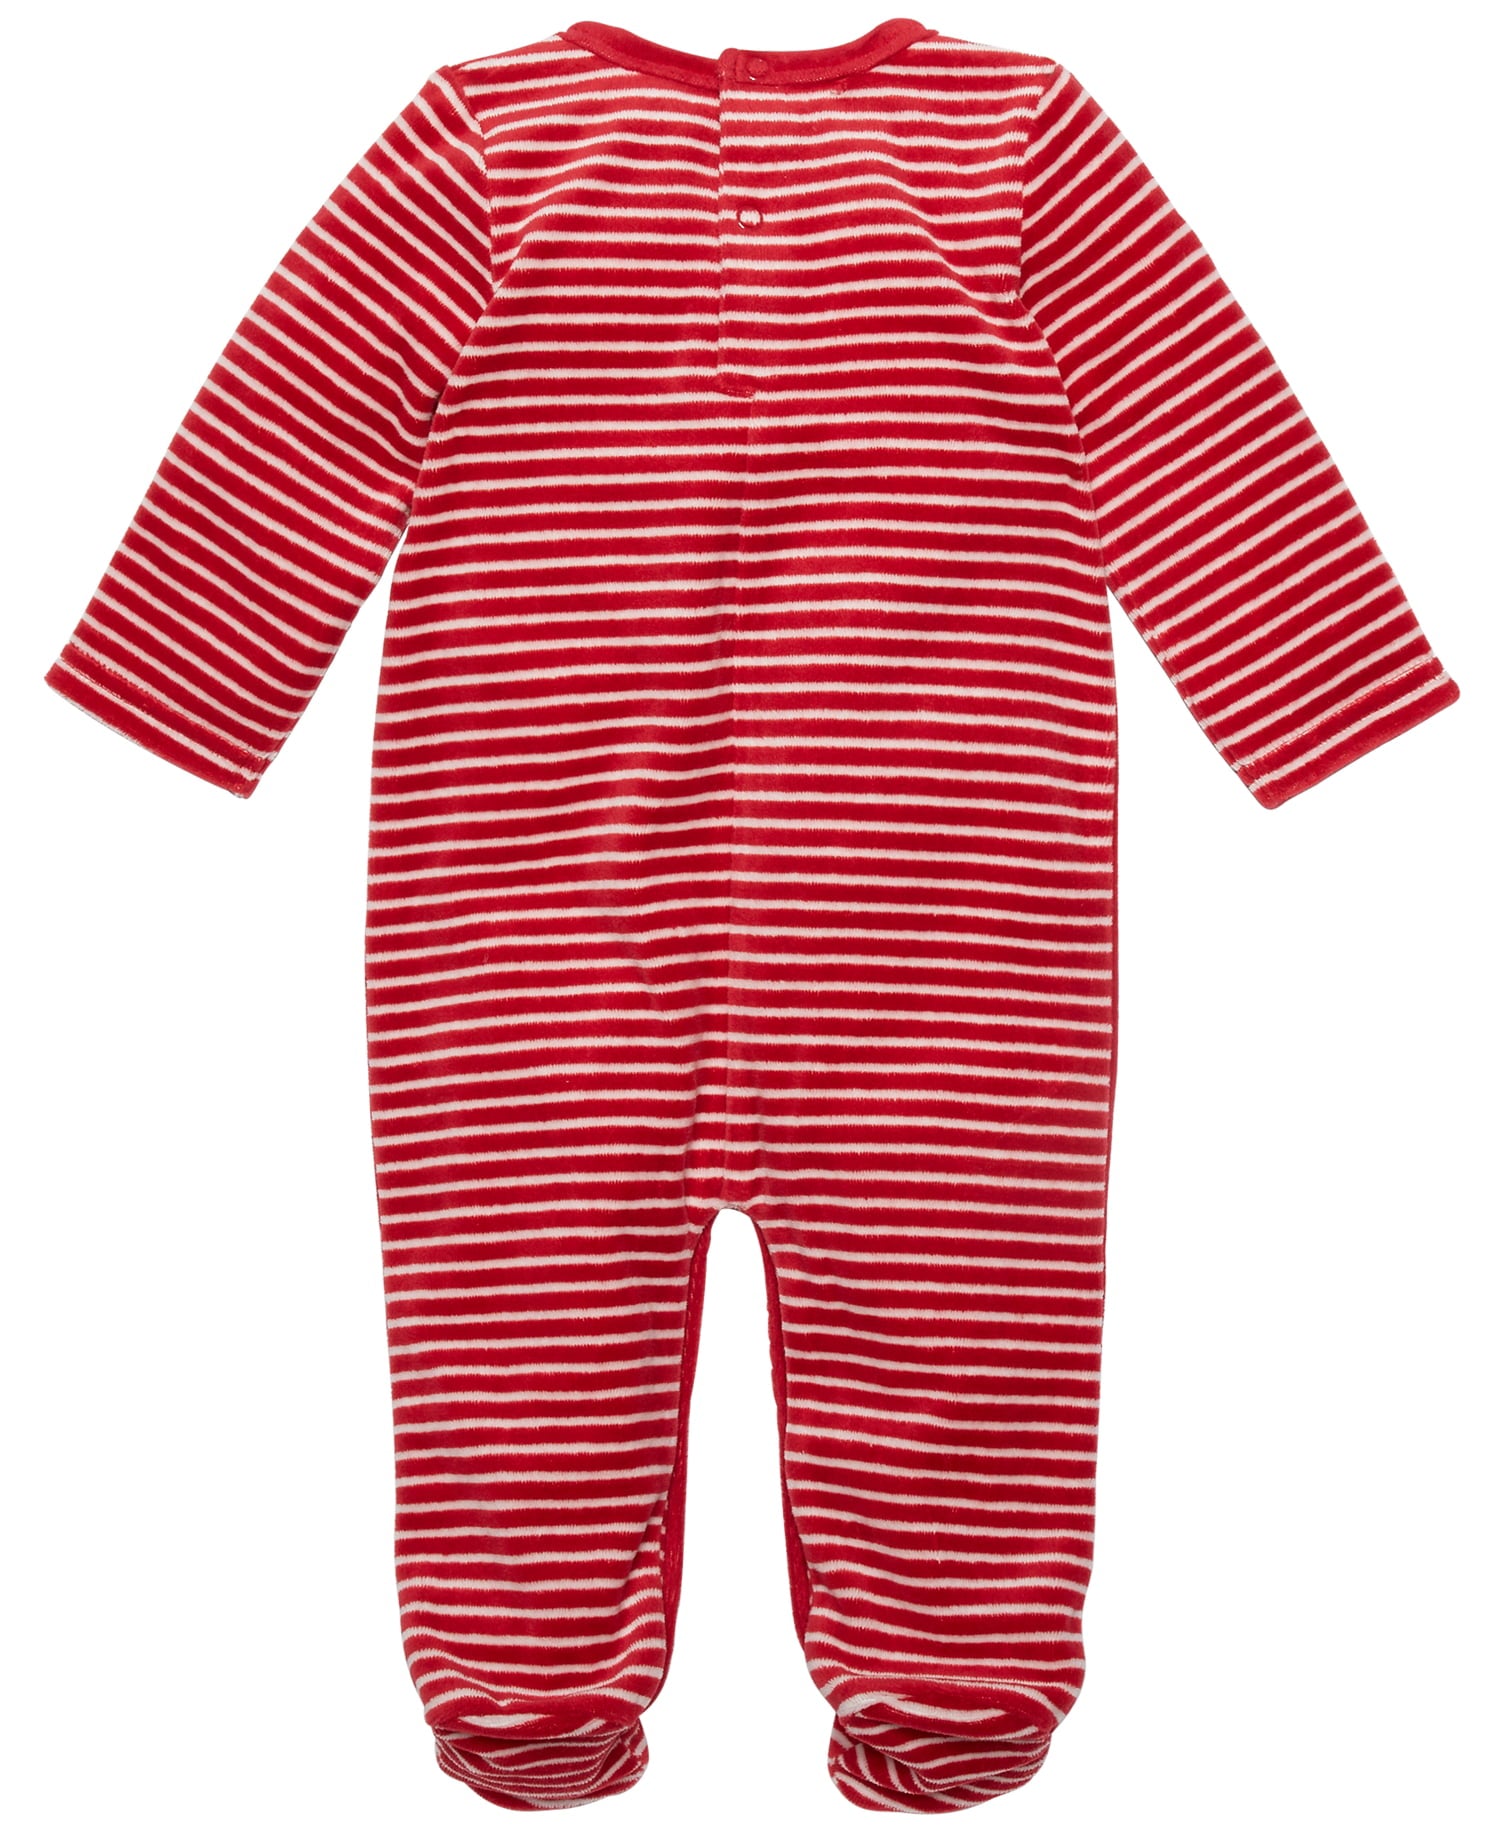 First Impressions Infant Boys Footed Striped Hat And Coverall Set 2 Piece Set,Newborn